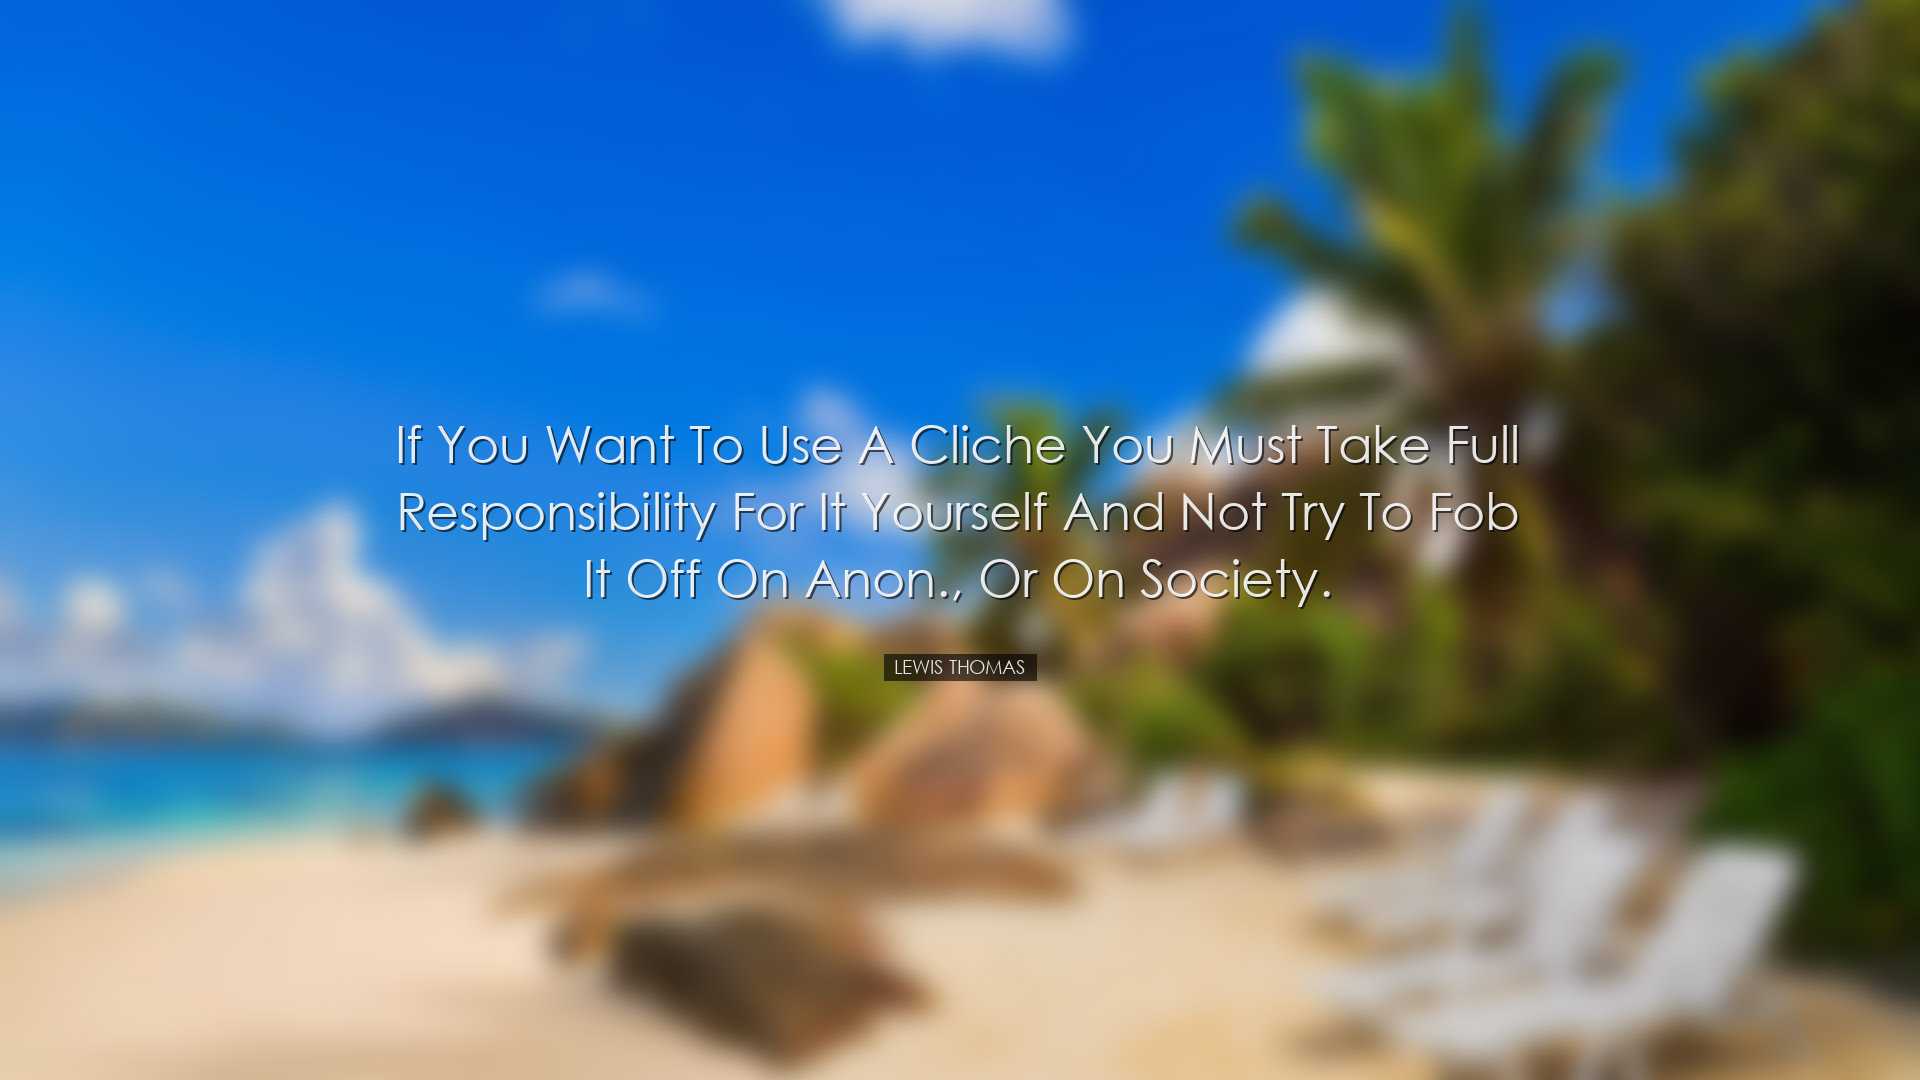 If you want to use a cliche you must take full responsibility for